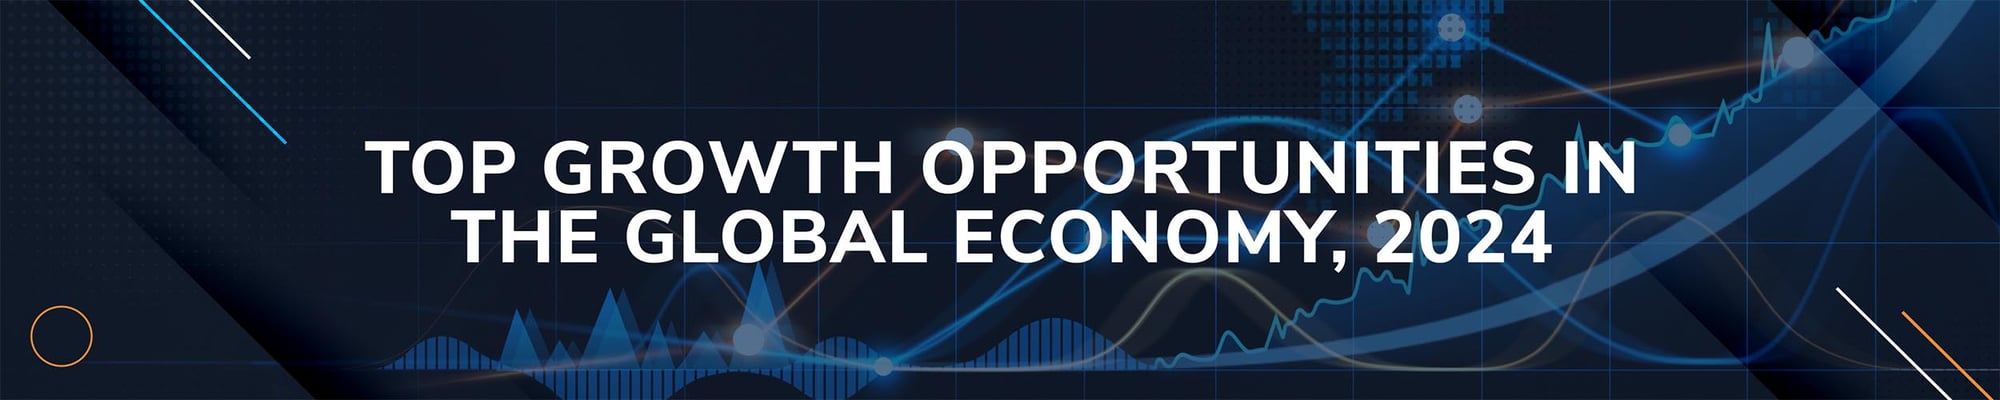 Top Growth Opportunities in the Global Economy, 2024 - LP